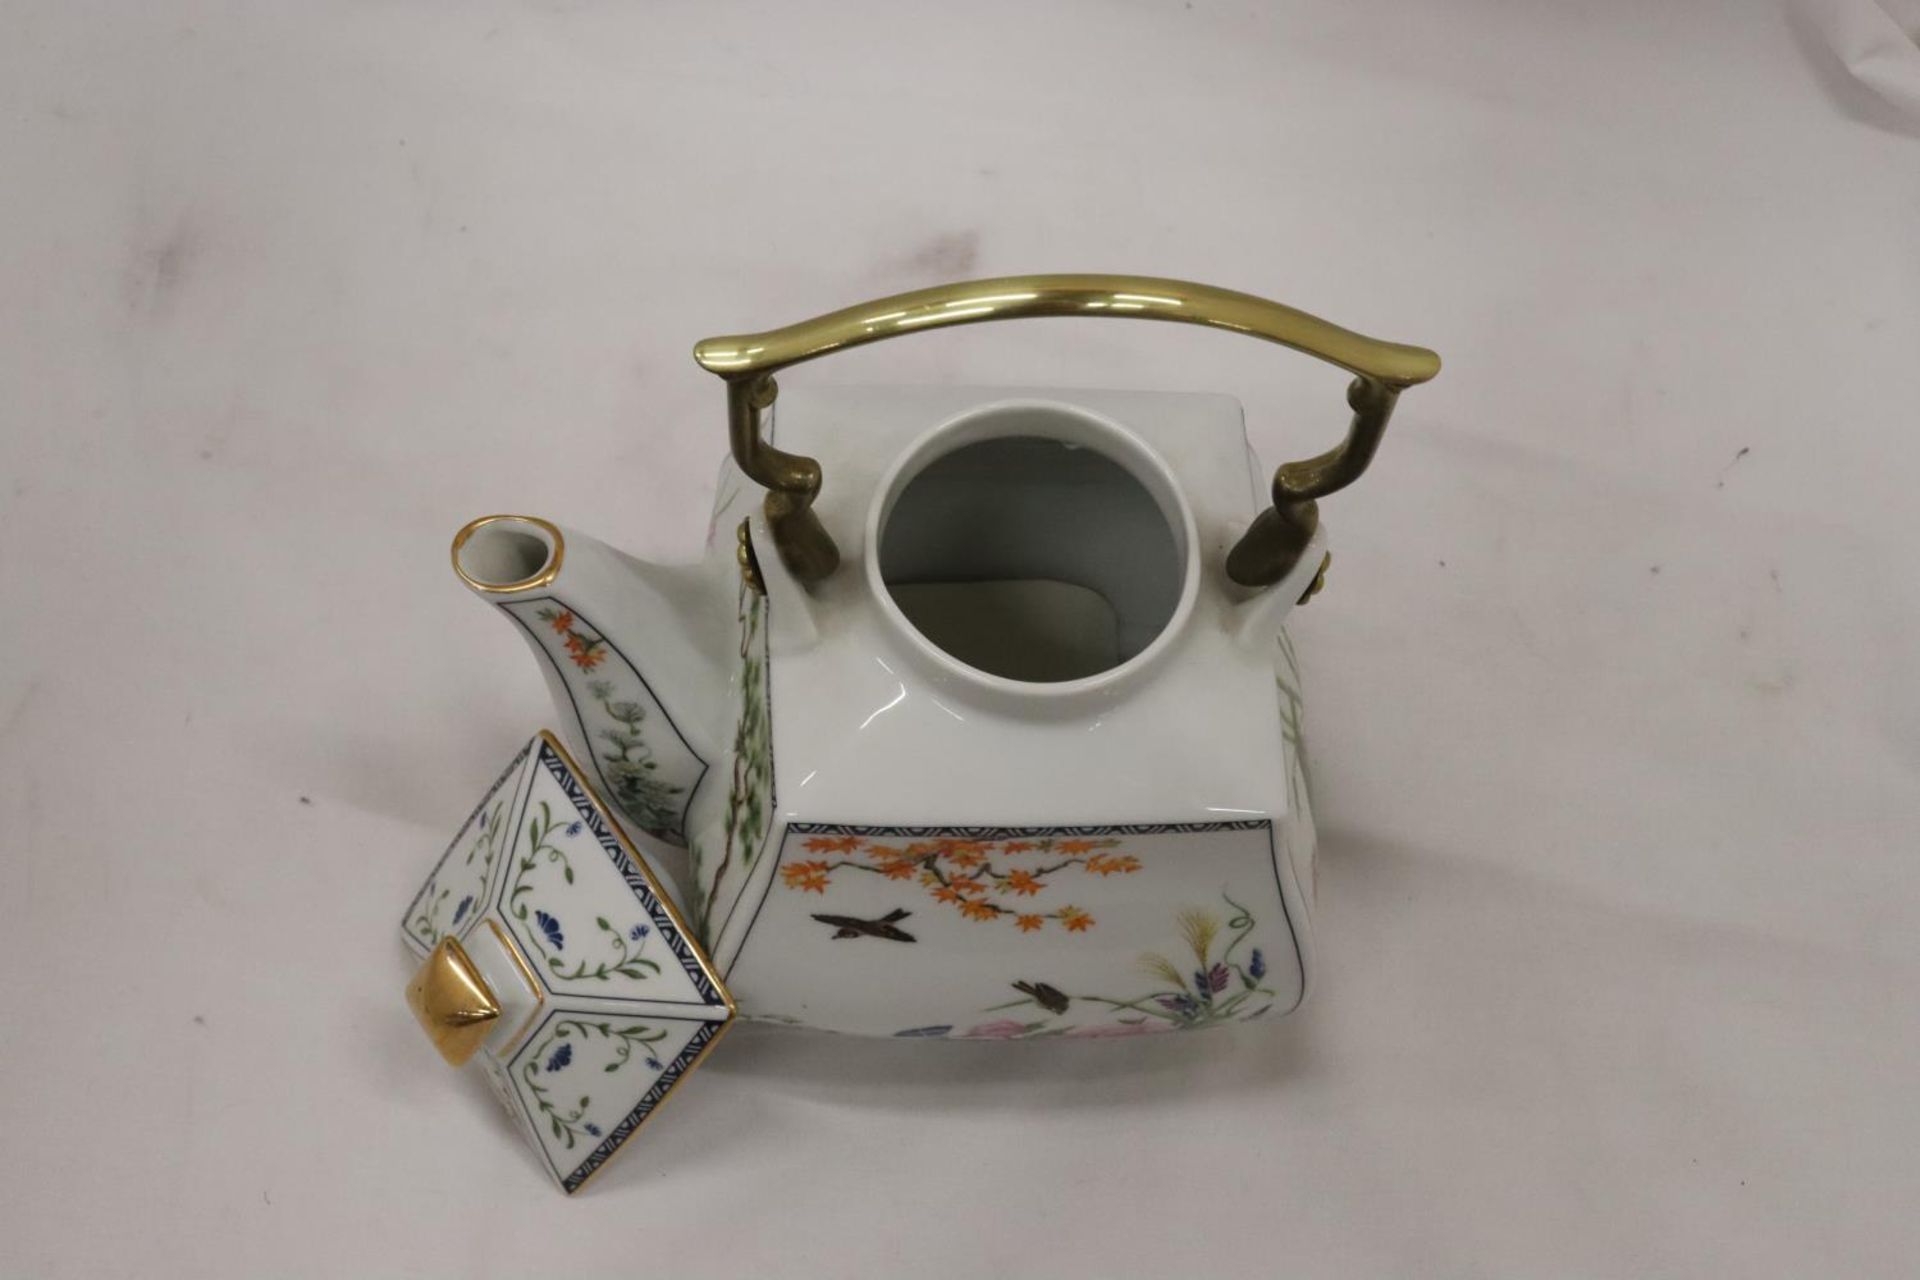 A FRANKLIN PORCELAIN 'THE BIRDS AND FLOWERS OF THE ORIENT' TEAPOT BY NAOKO NOBATA WITH 22CT GOLD - Image 5 of 7